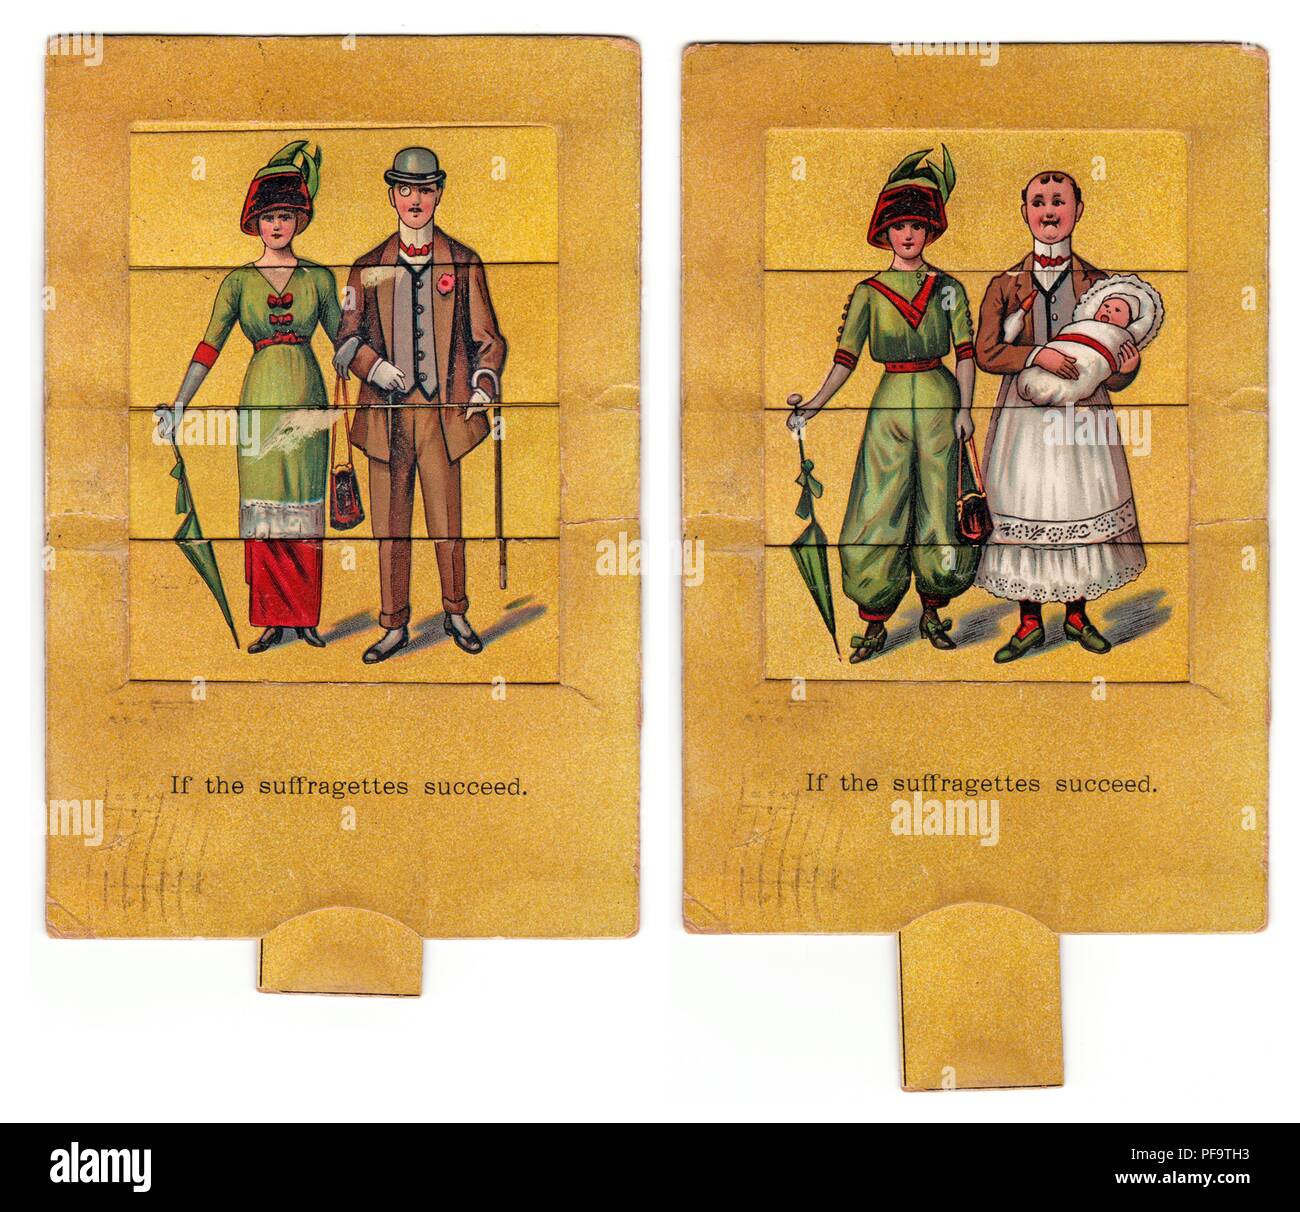 Metamorphic, color, anti-suffrage postcard, with a tab at the bottom of the card that can be pulled to change the image from a conventionally depicted Edwardian couple, to an image with the gender roles reversed, the woman wearing trousers and the man wearing a skirt and holding a baby, captioned 'If the suffragettes succeed, ' published for the American market, 1900. Photography by Emilia van Beugen. () Stock Photo